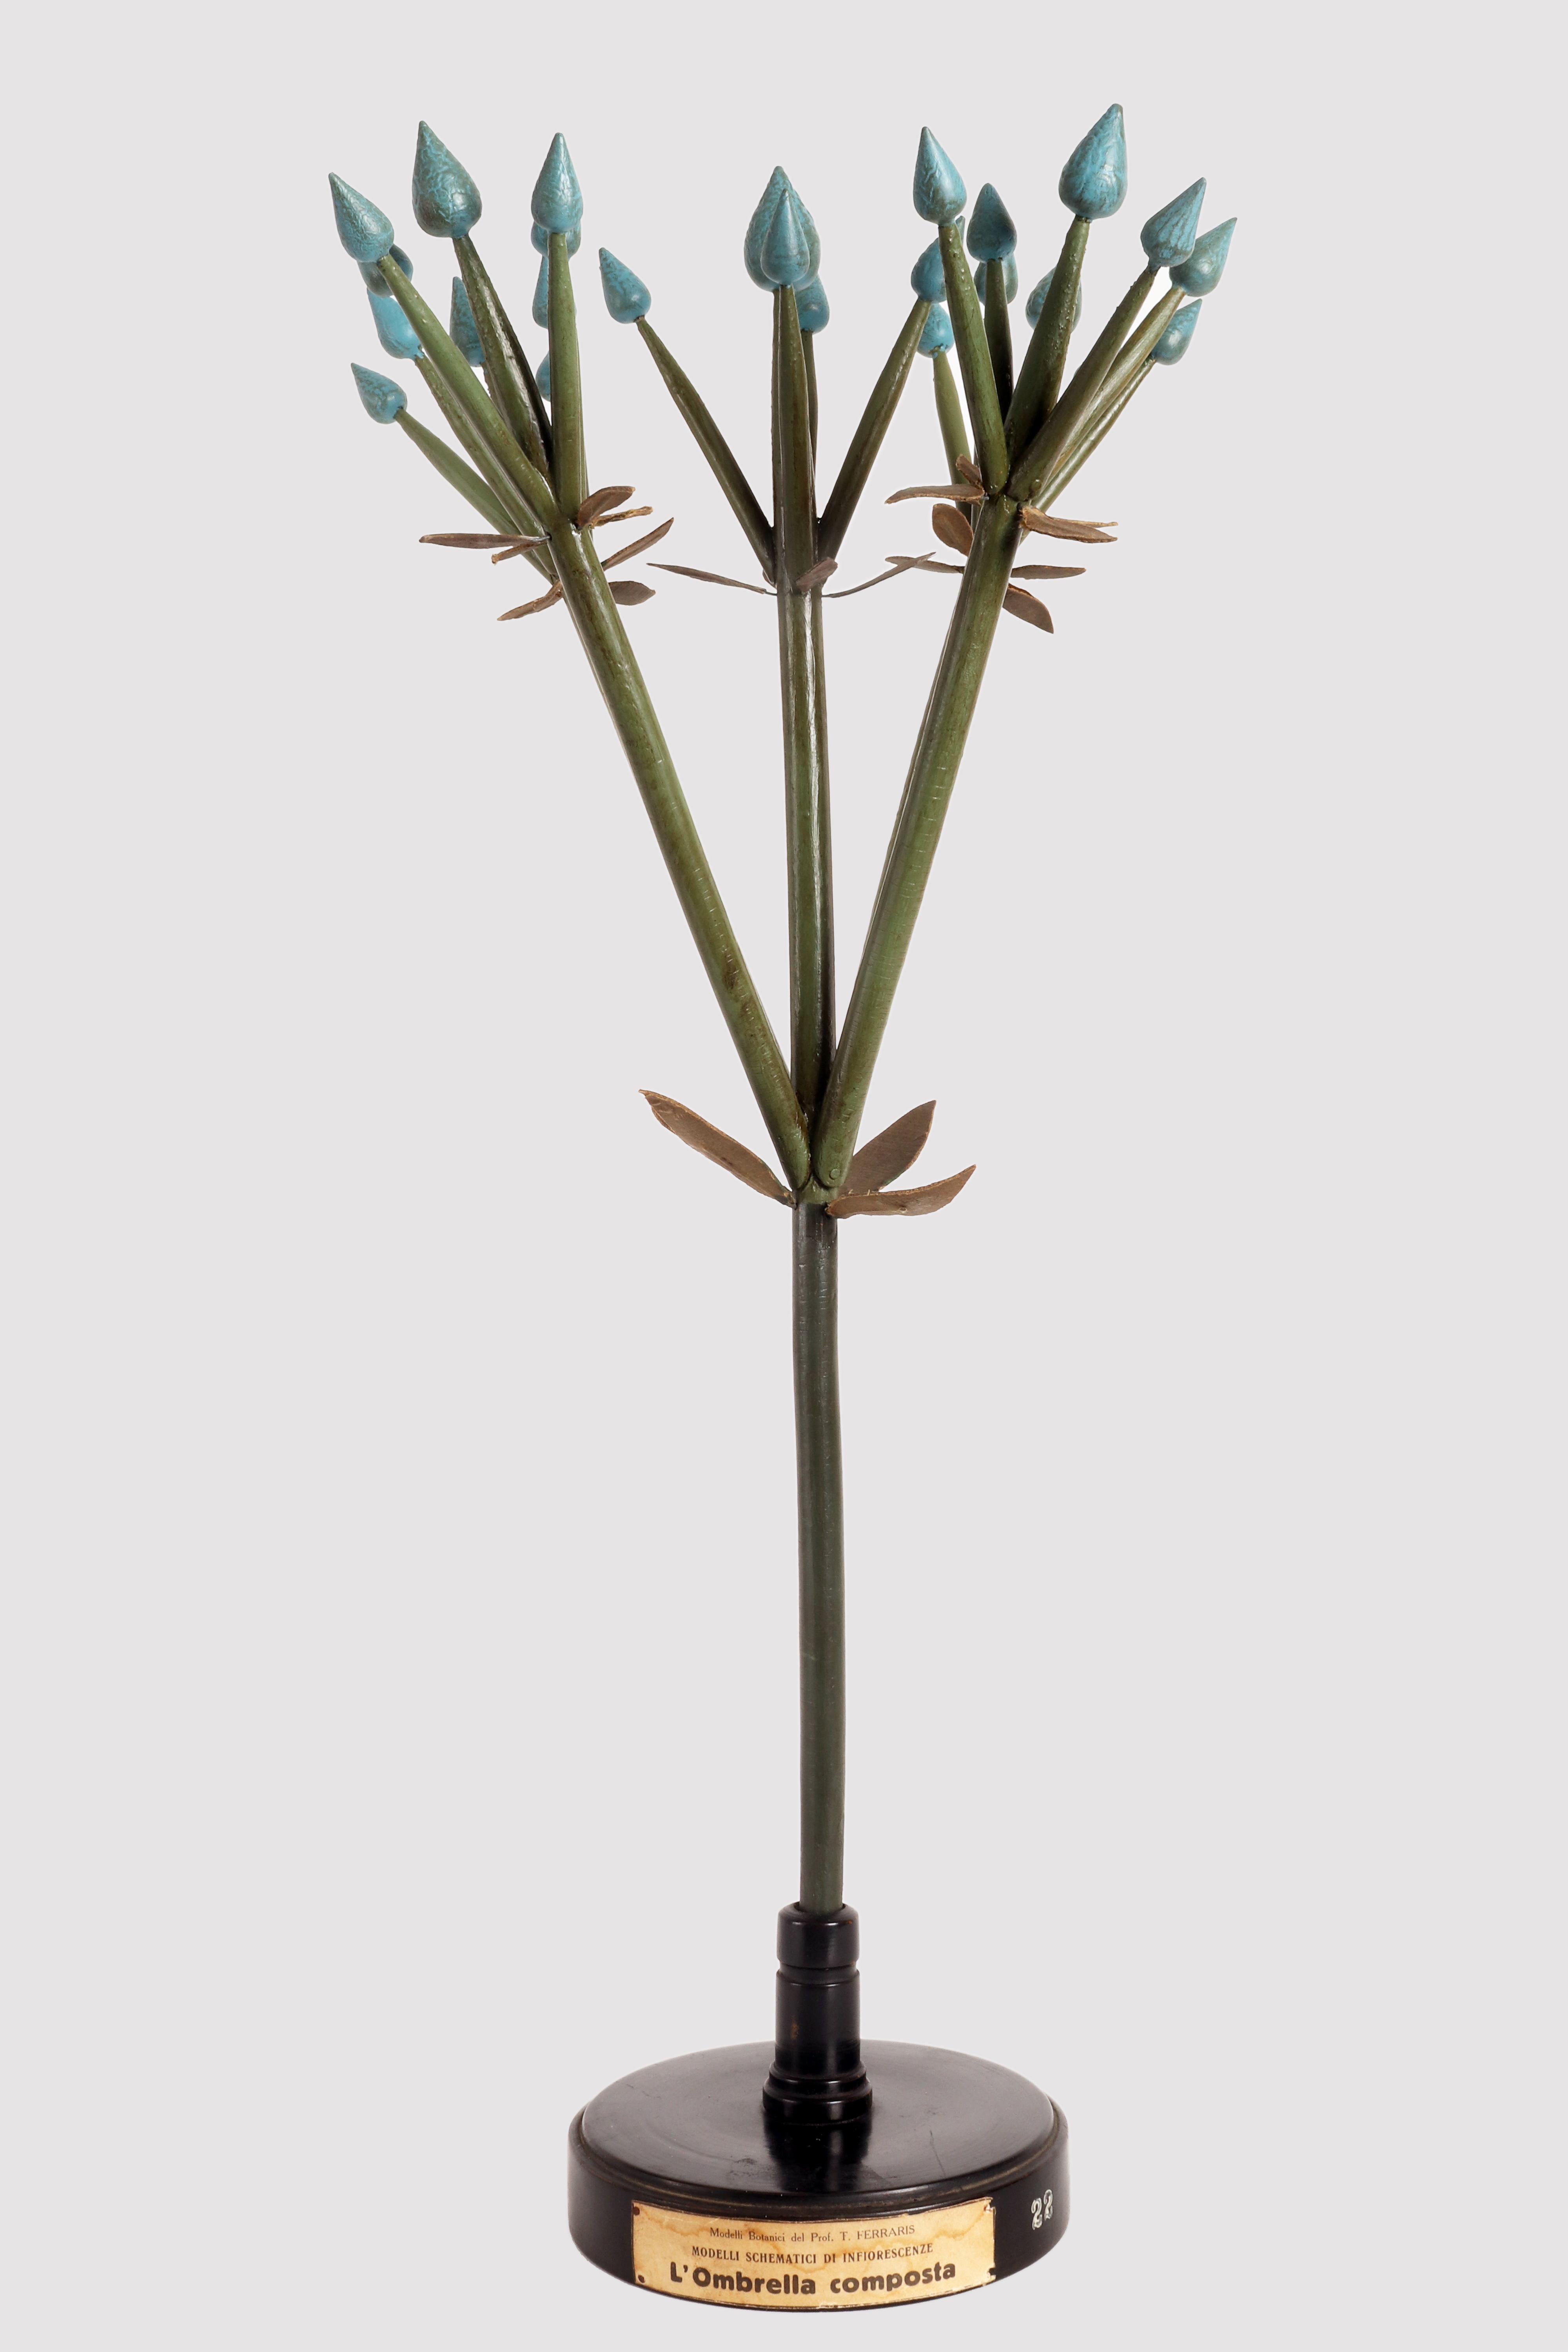 A rare botanic didactical model of one type of inflorescence specimen, the Spiga, made out of hand painted colored plaster gems, wooden branches and painted papier mache components. Mounted on a round black wooden base, hand painted. Paper label.